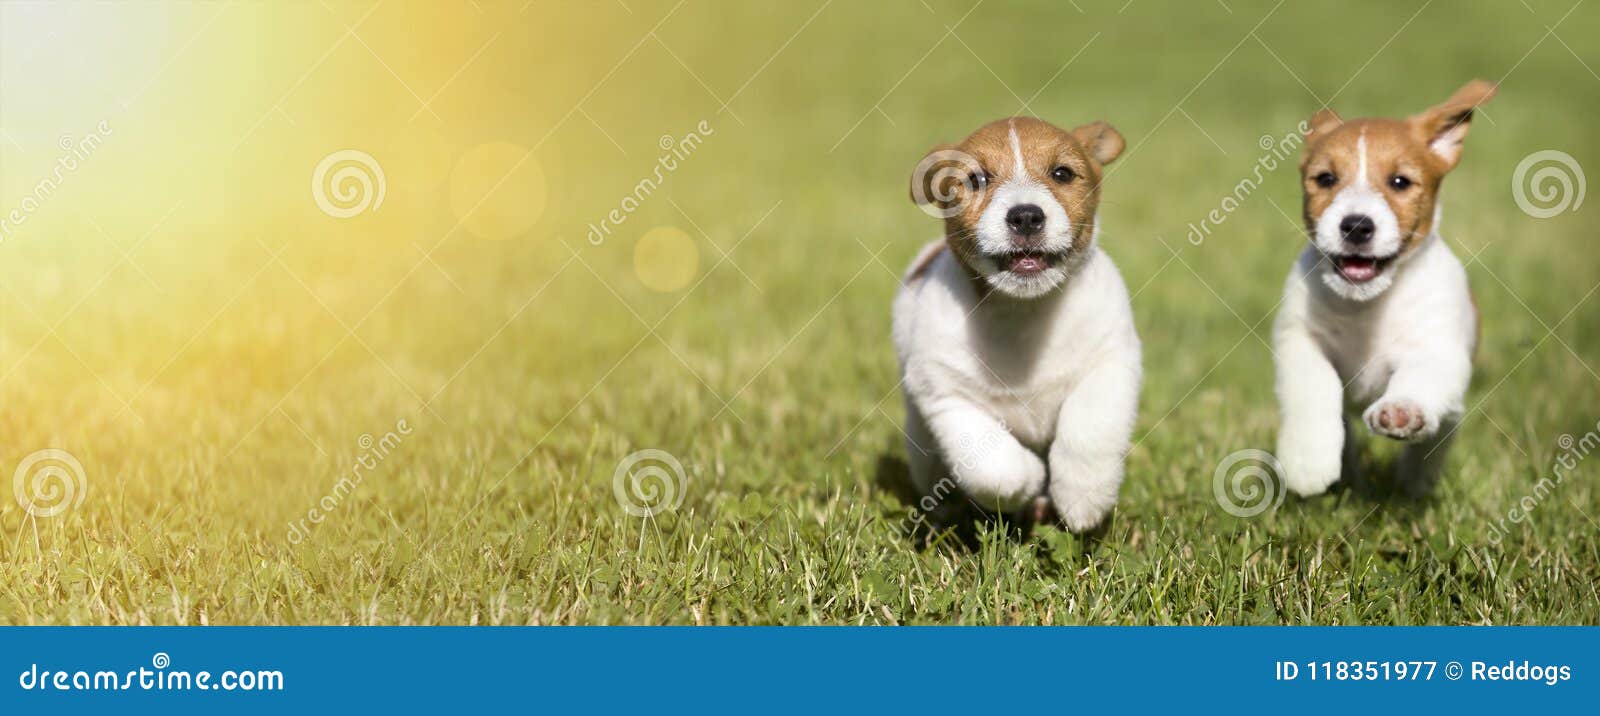 dog puppies playing - web banner idea